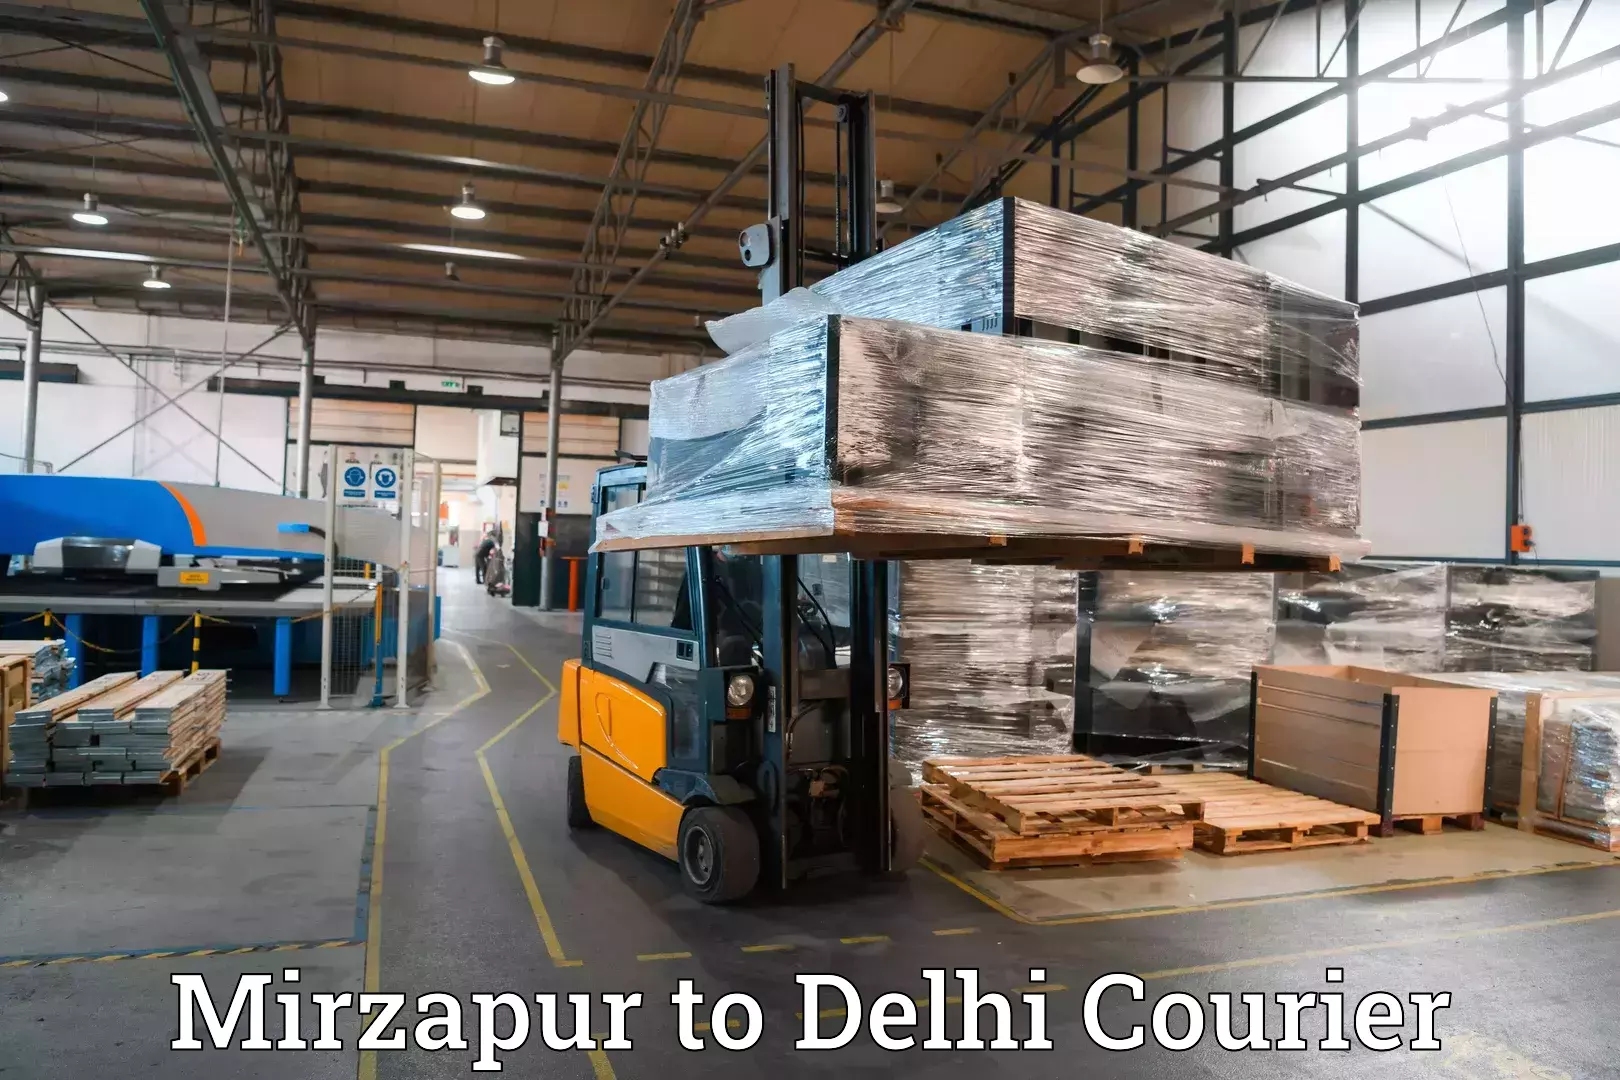 Instant baggage transport quote Mirzapur to NCR